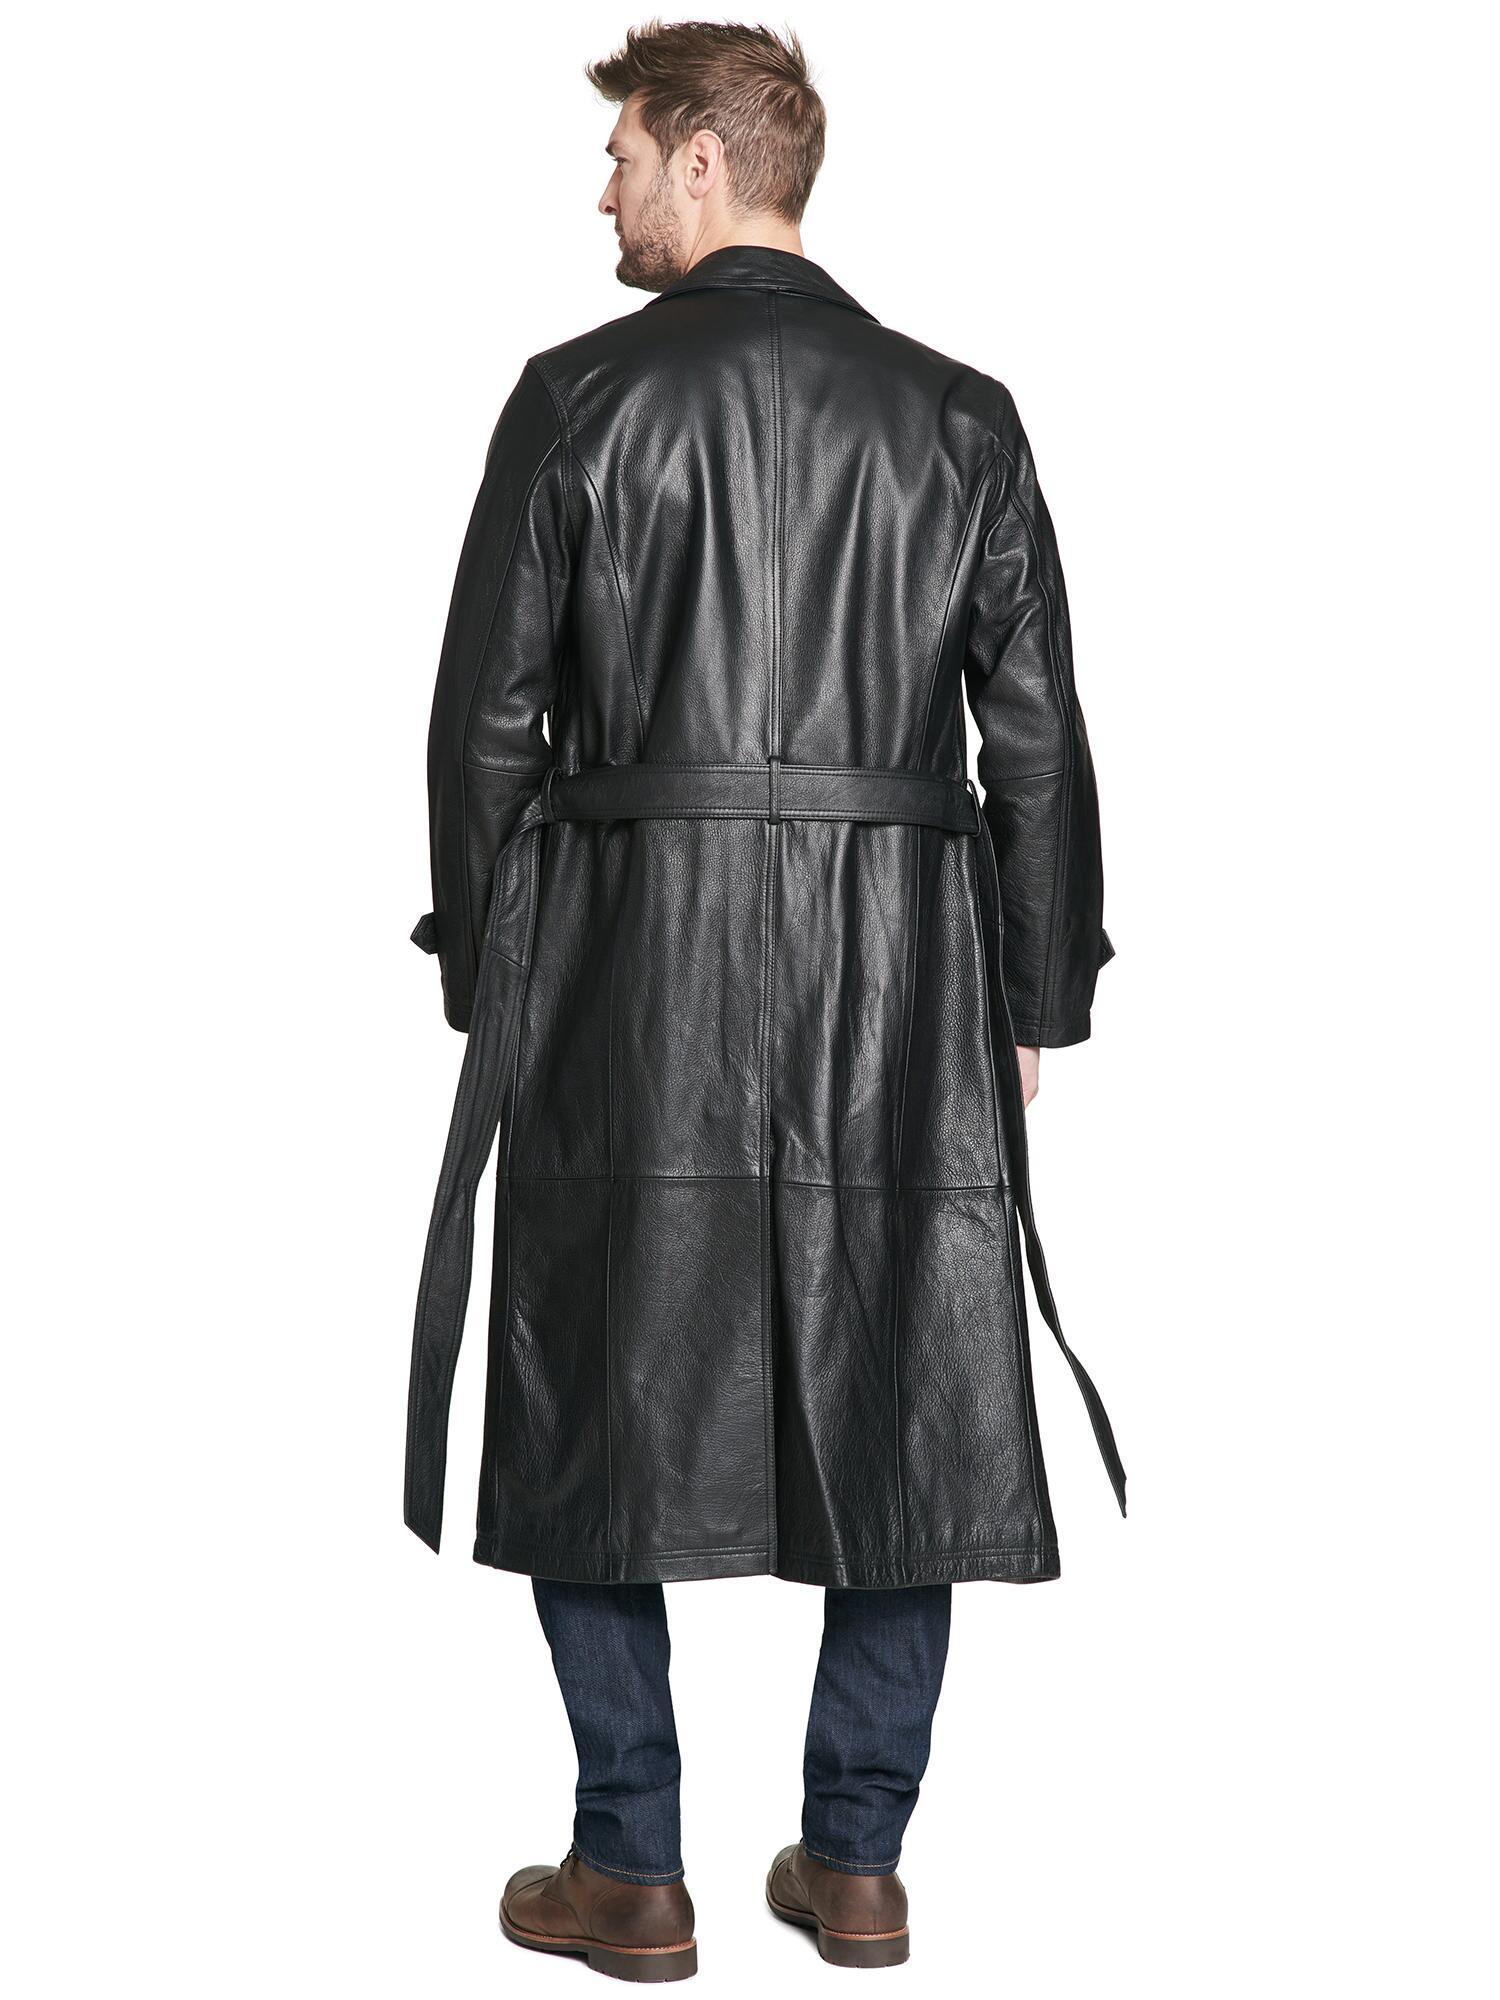 Wilsons Leather Oliver Belted Leather Trench Coat in Black for Men - Lyst